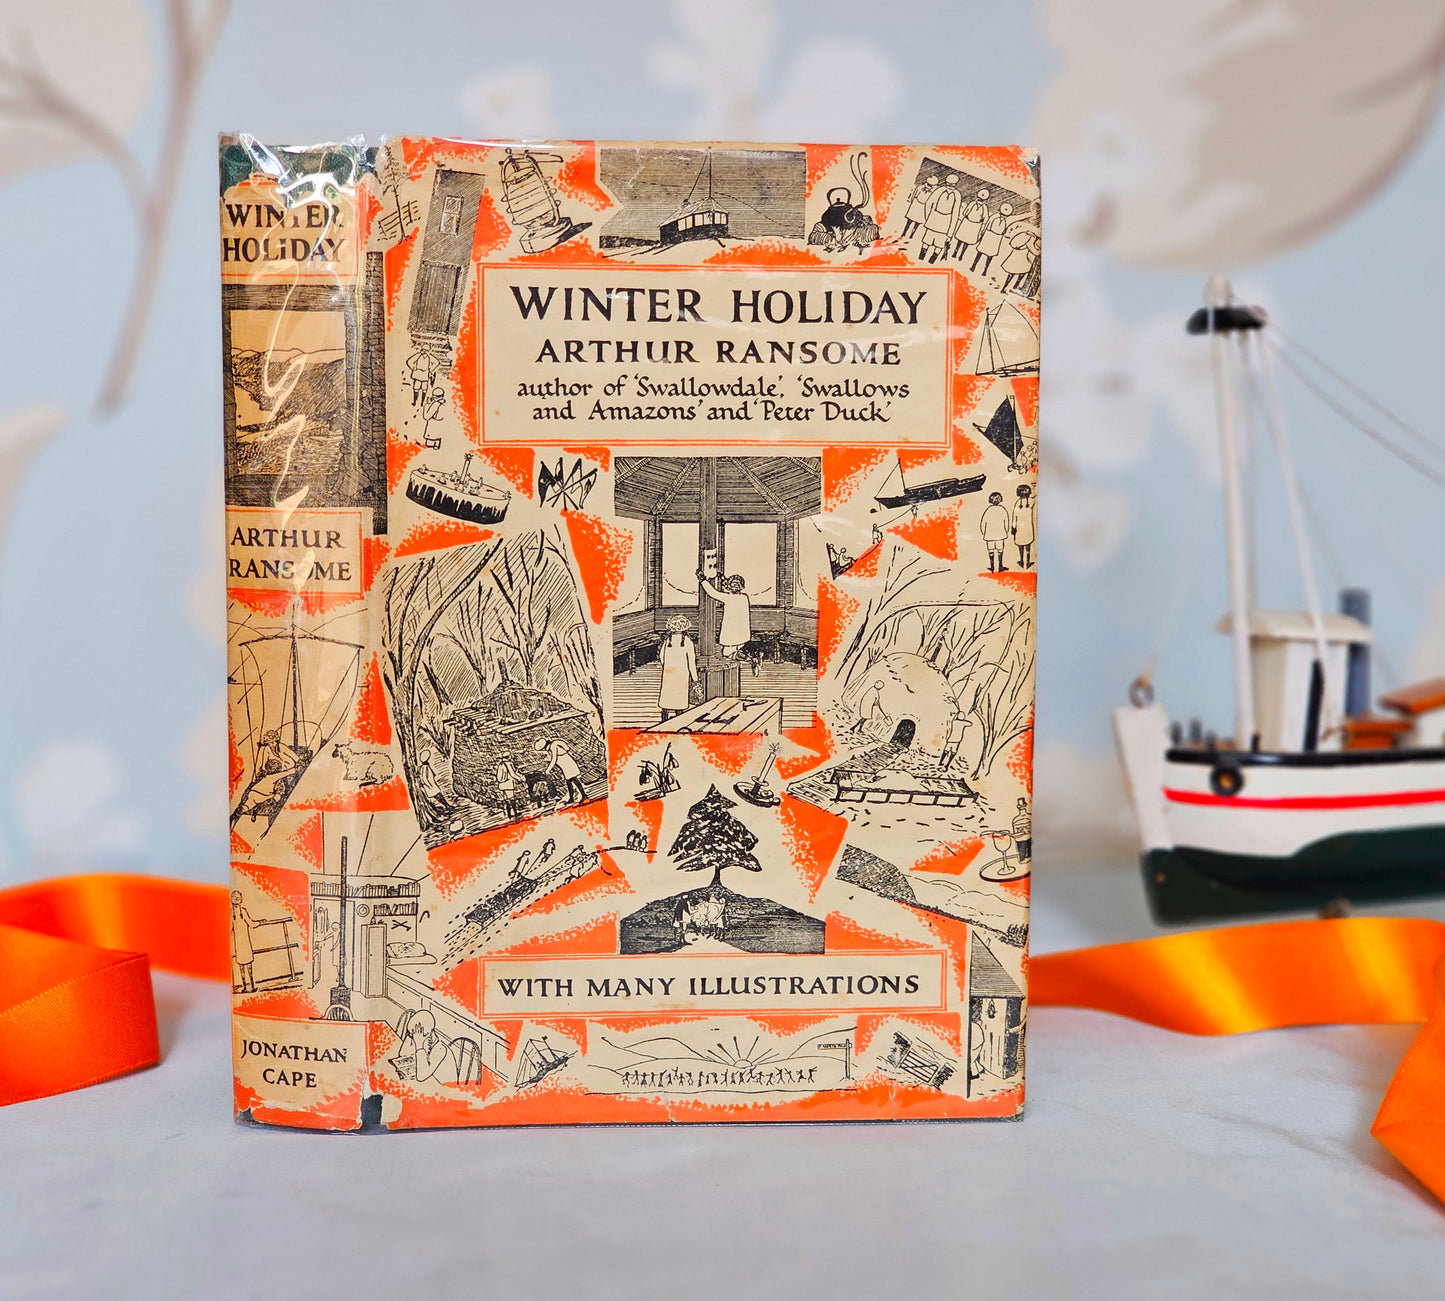 Winter Holiday by Arthur Ransome / 1949 Jonathan Cape, London / In The Swallows & Amazons Series / Vintage Hardback Book